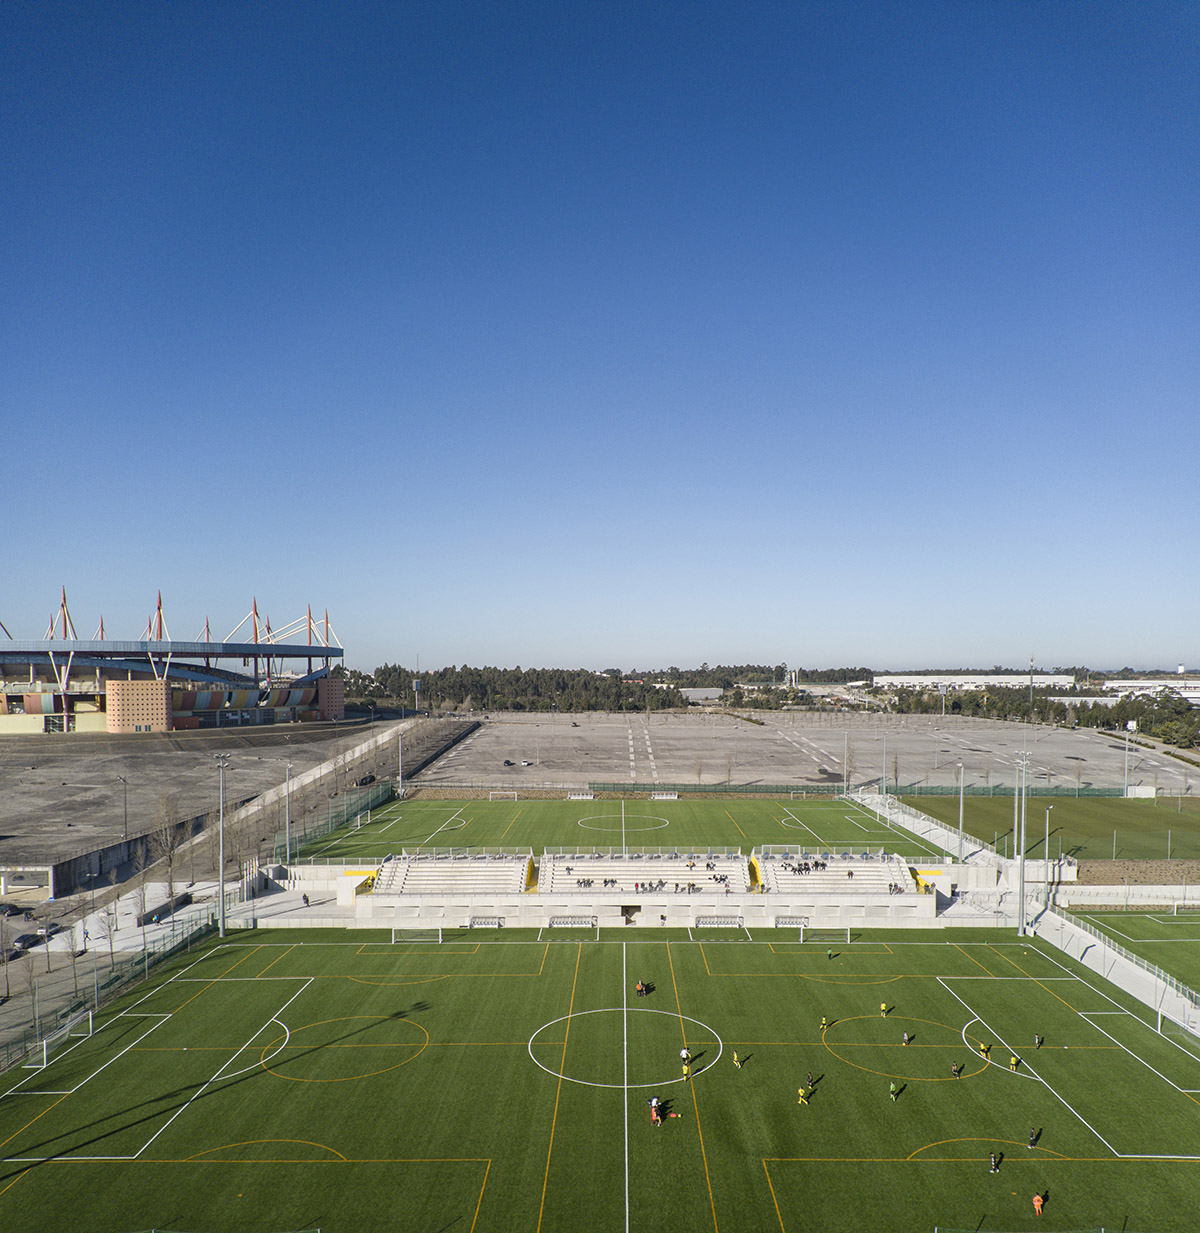 Summary highlights circulation and public areas of training facility of stadium with yellow color